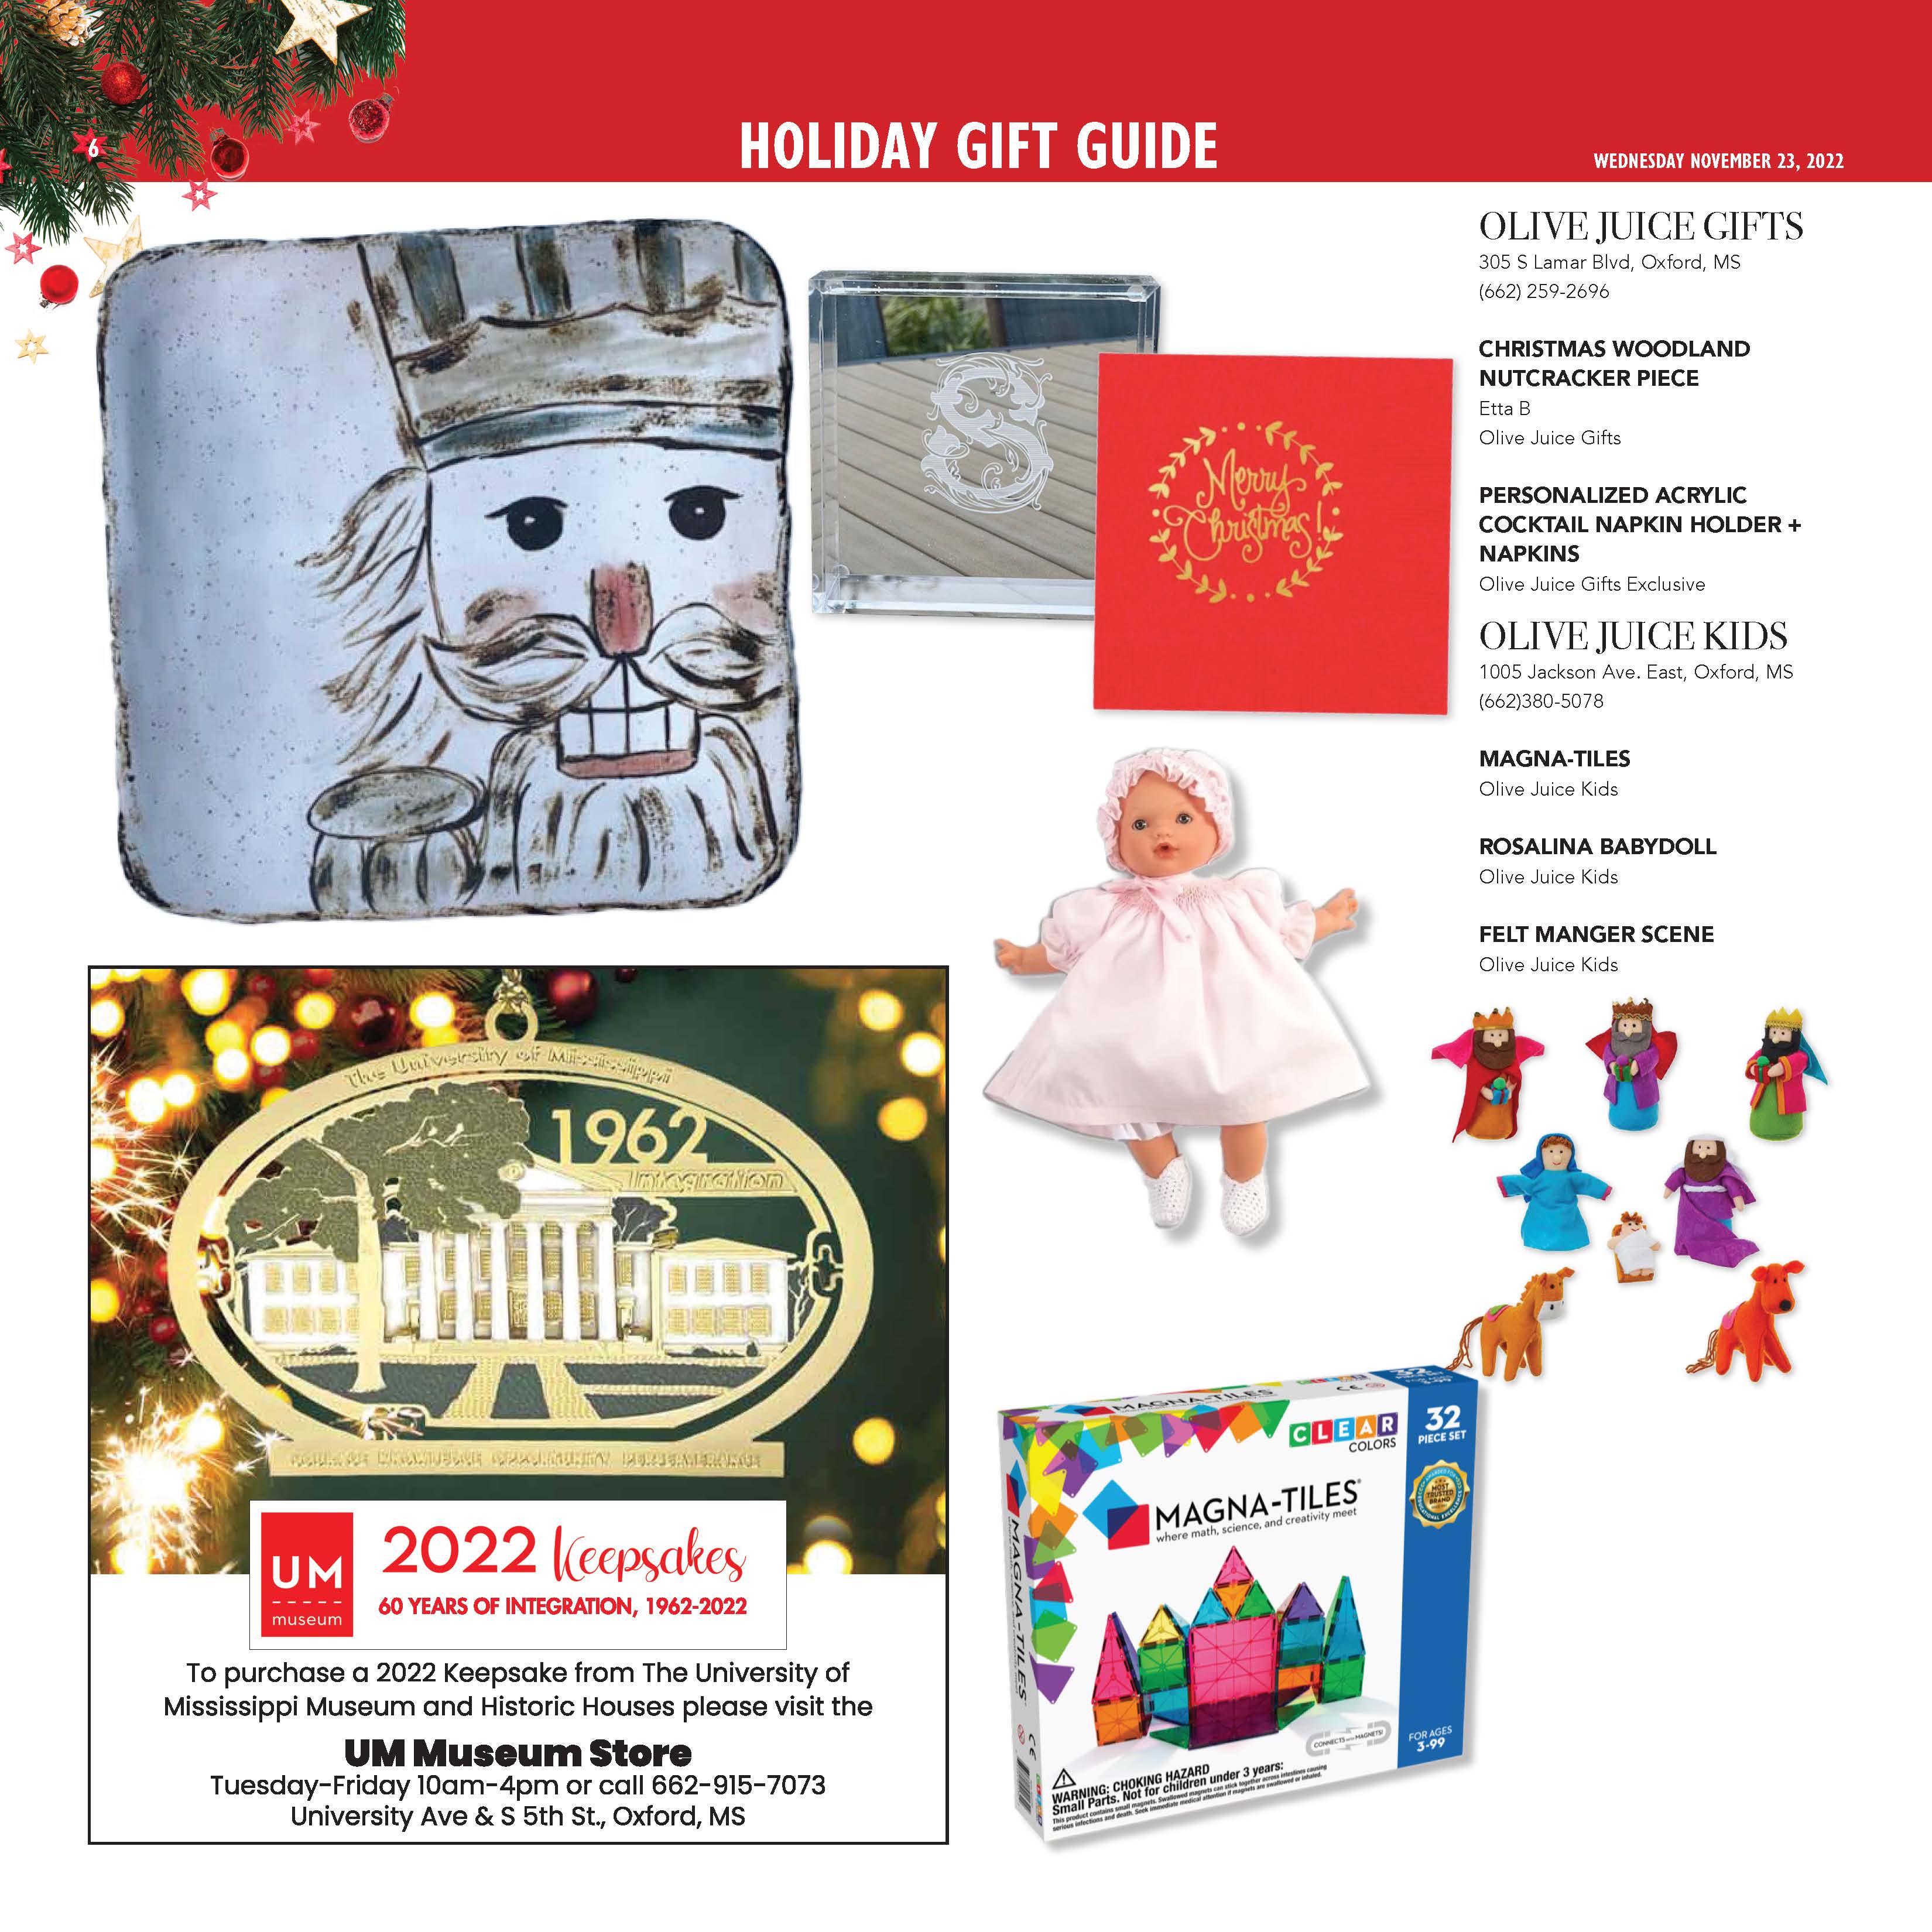 2022 True North Shop Holiday Gift Guide by Winnipeg Jets - Issuu